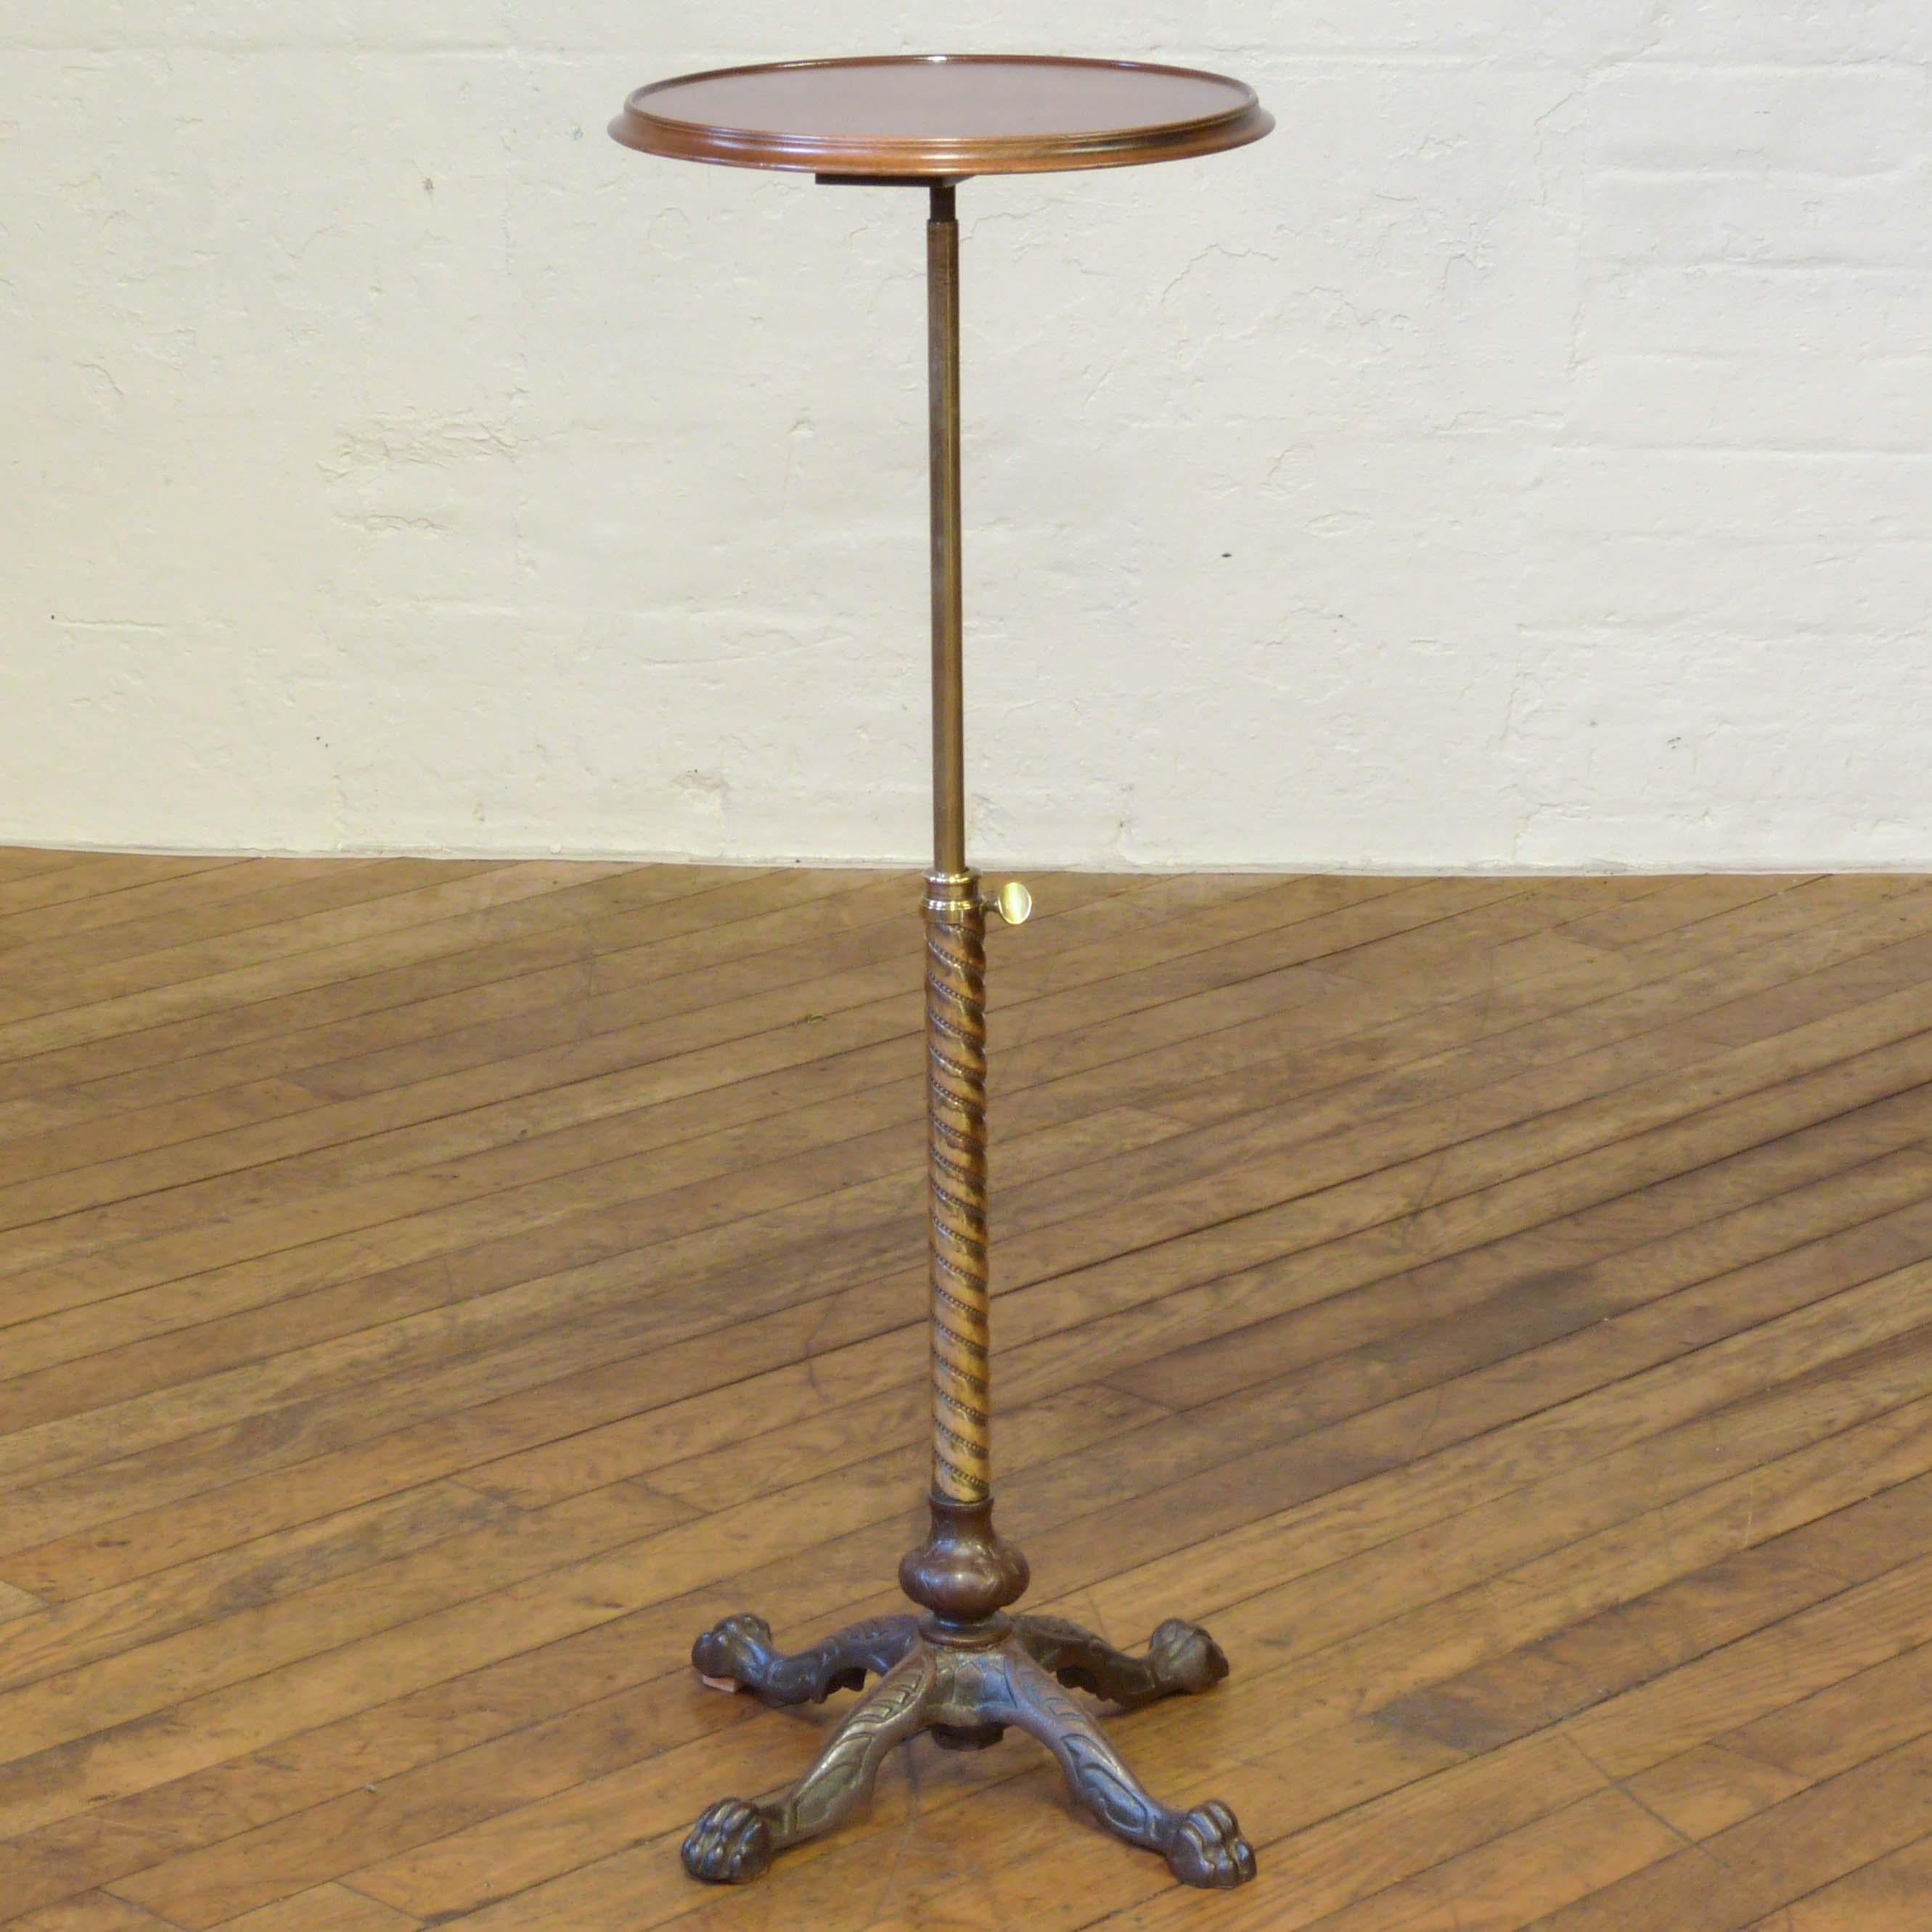 A rare Victorian table originally used by a dentist. The legs are cast iron, which has been stripped and polished, whilst the central column is of brass and is of a wonderful spiral form, with a telescopic adjustment that can double the height. The